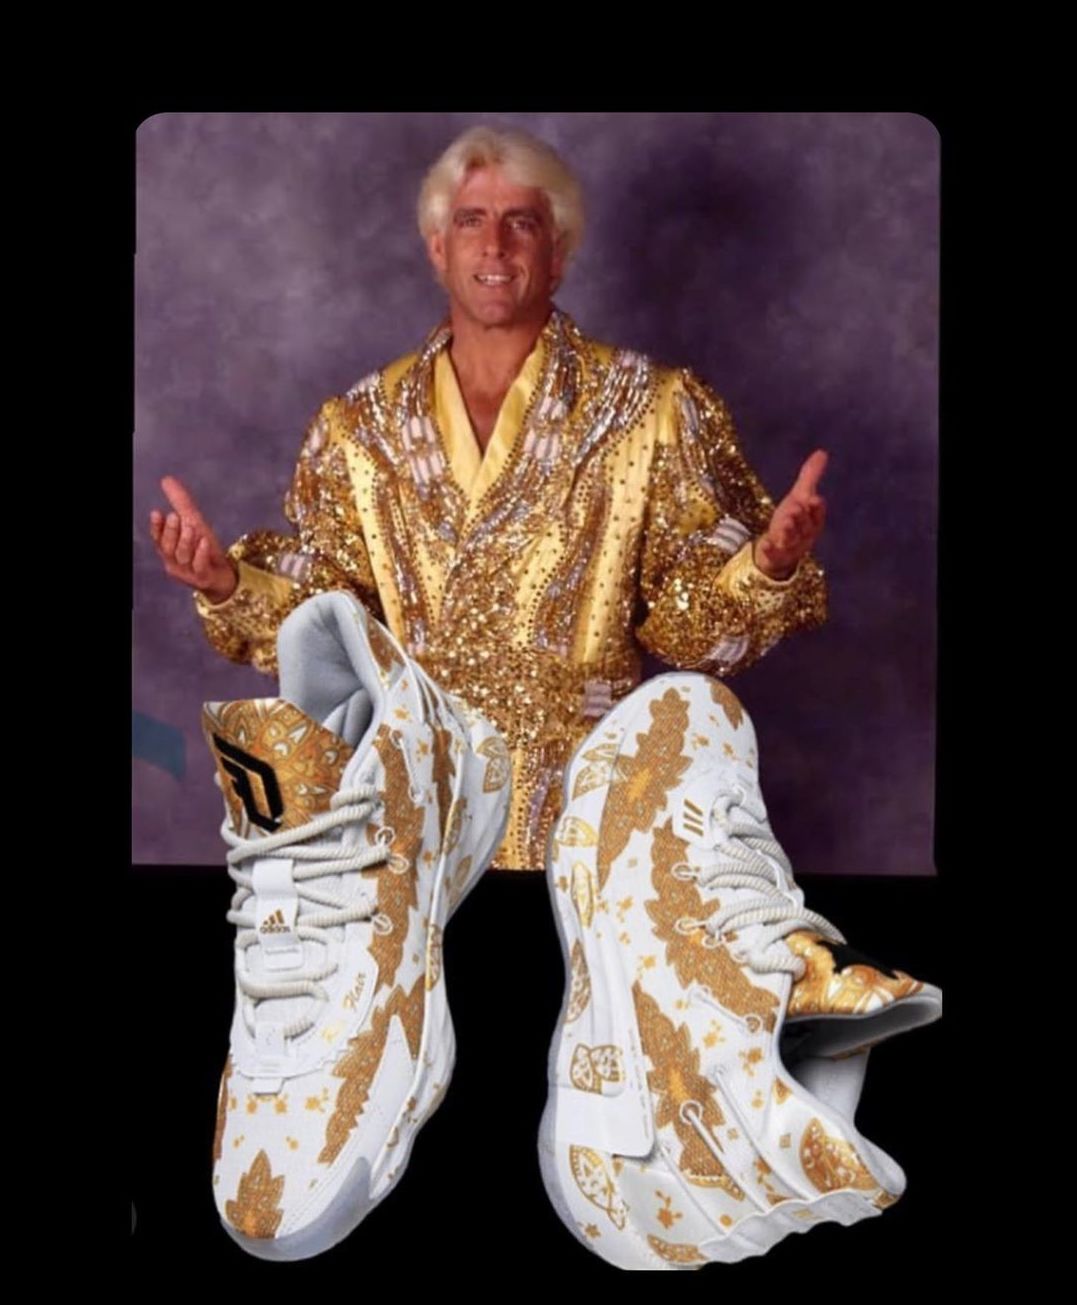 Ric Flair's Outfits Inspire This Adidas Dame 7 Colorway | Complex